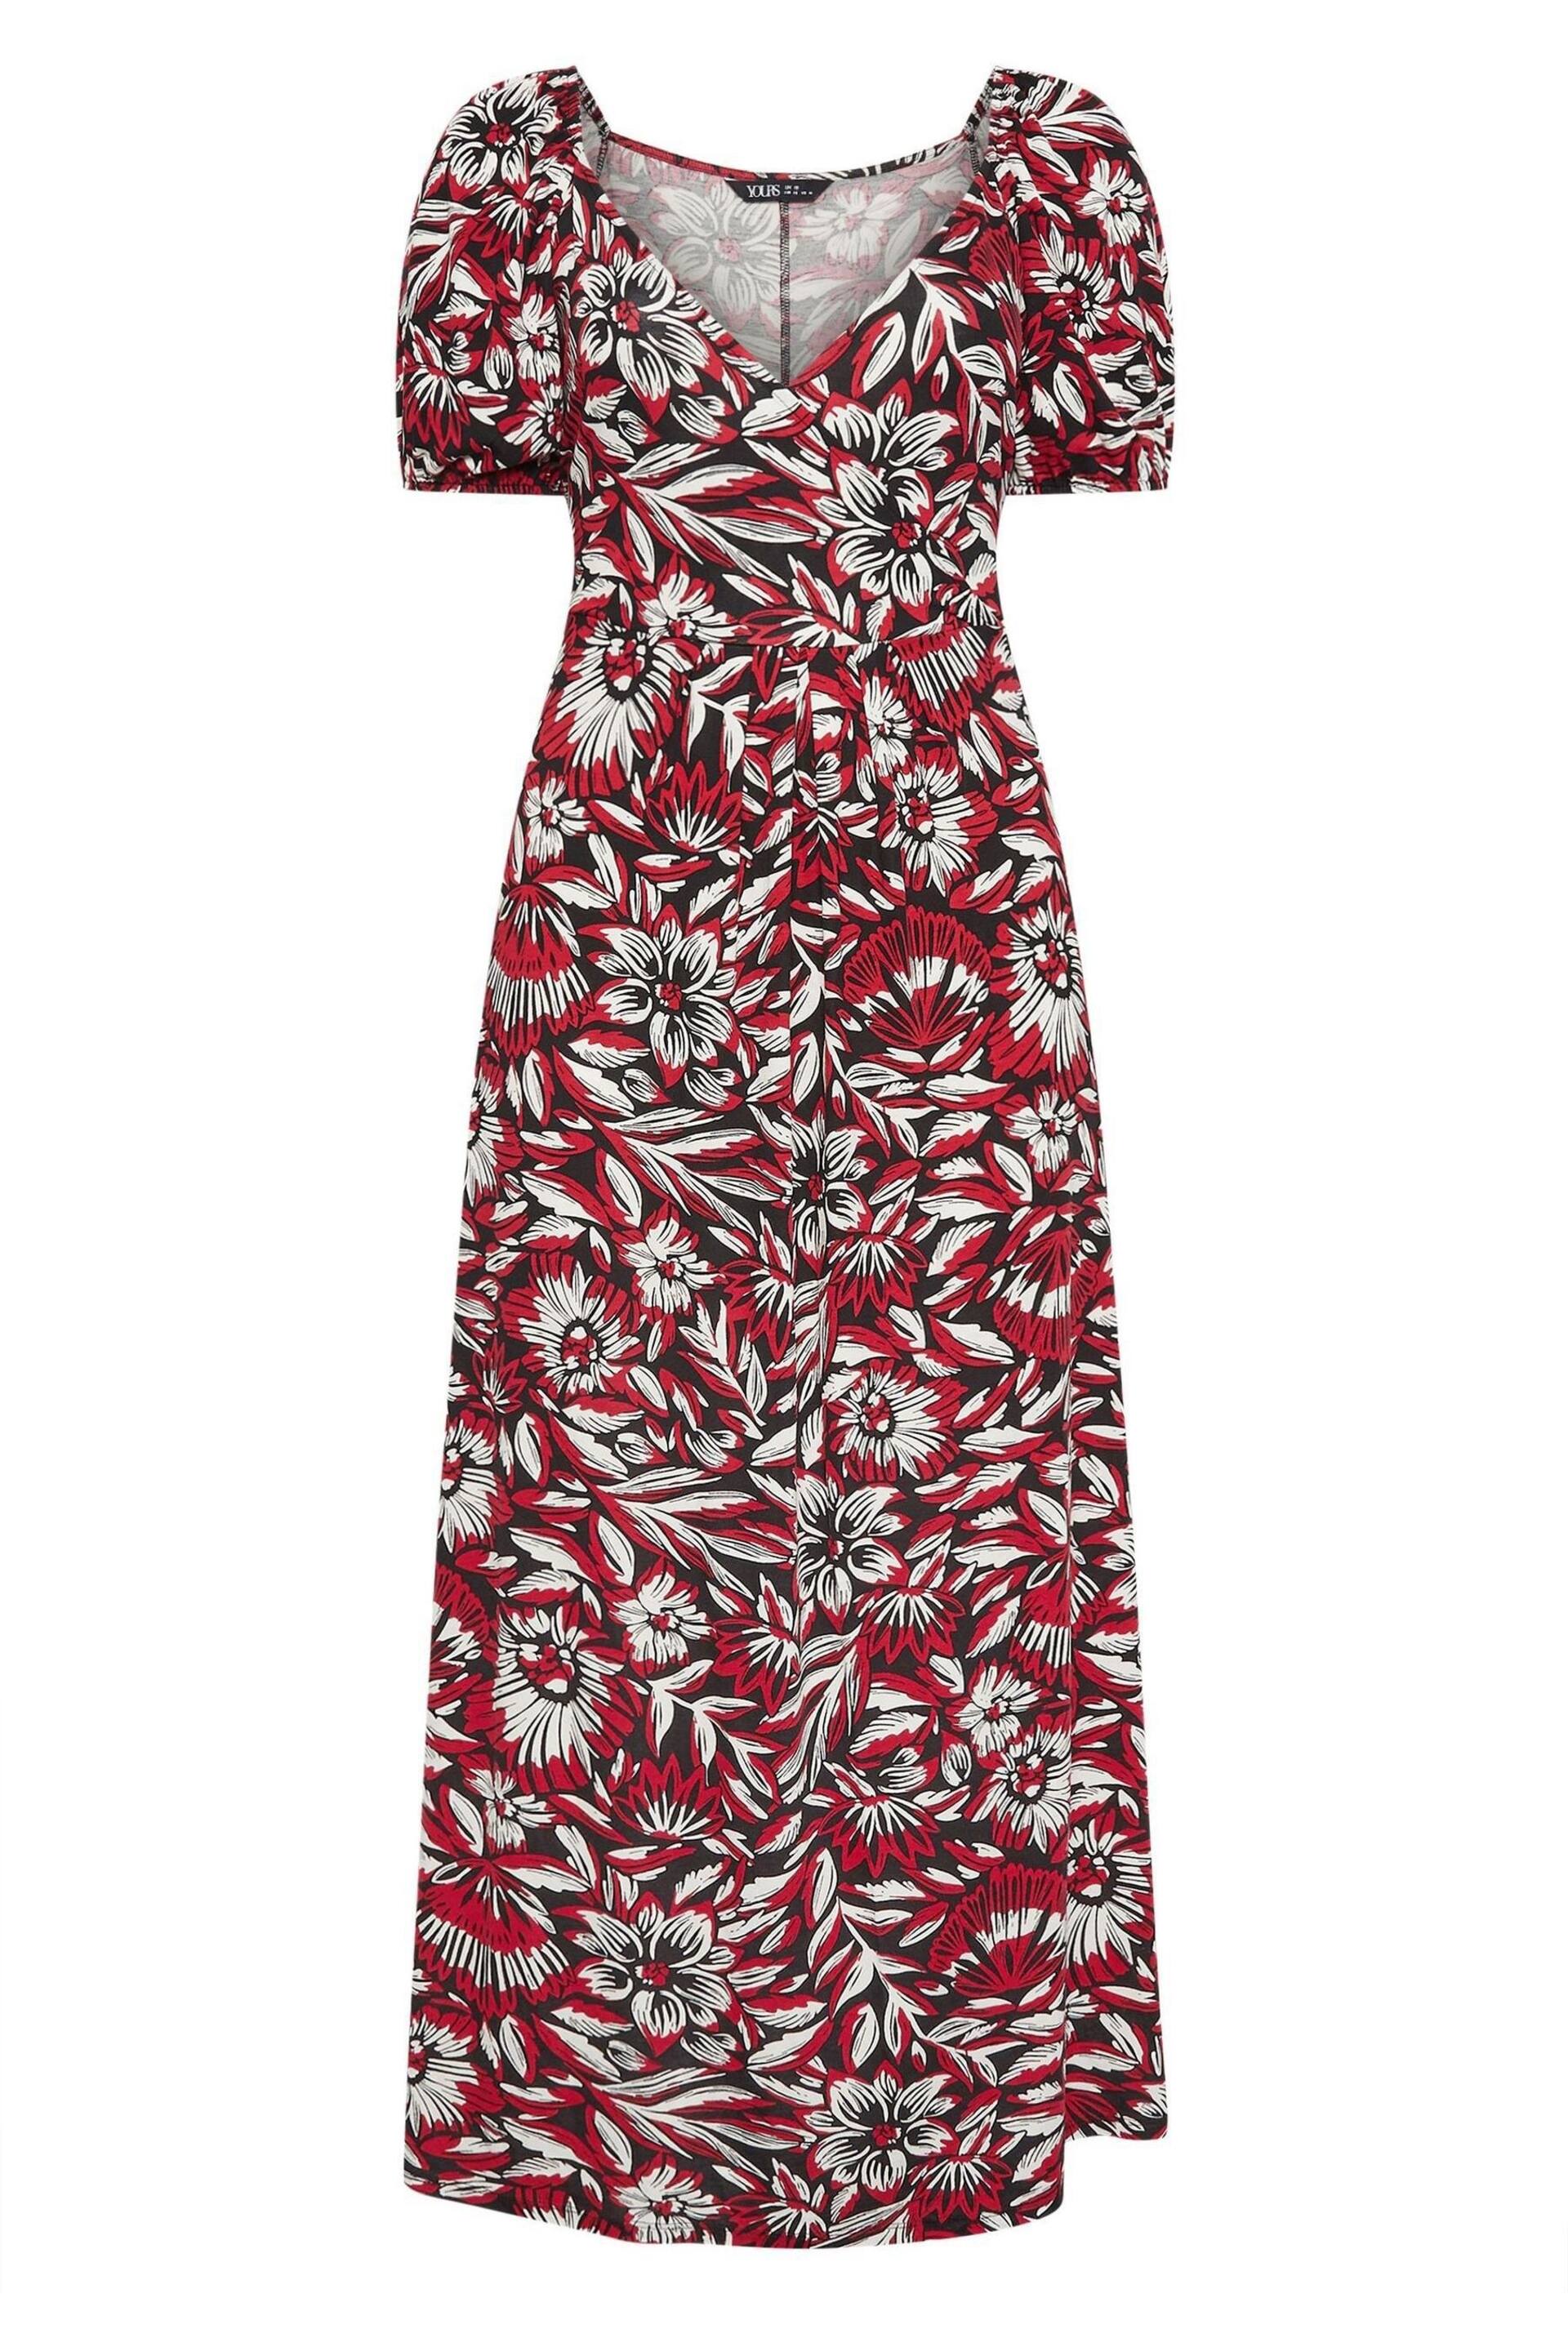 Yours Curve Red Floral Wrap Maxi Dress - Image 5 of 5